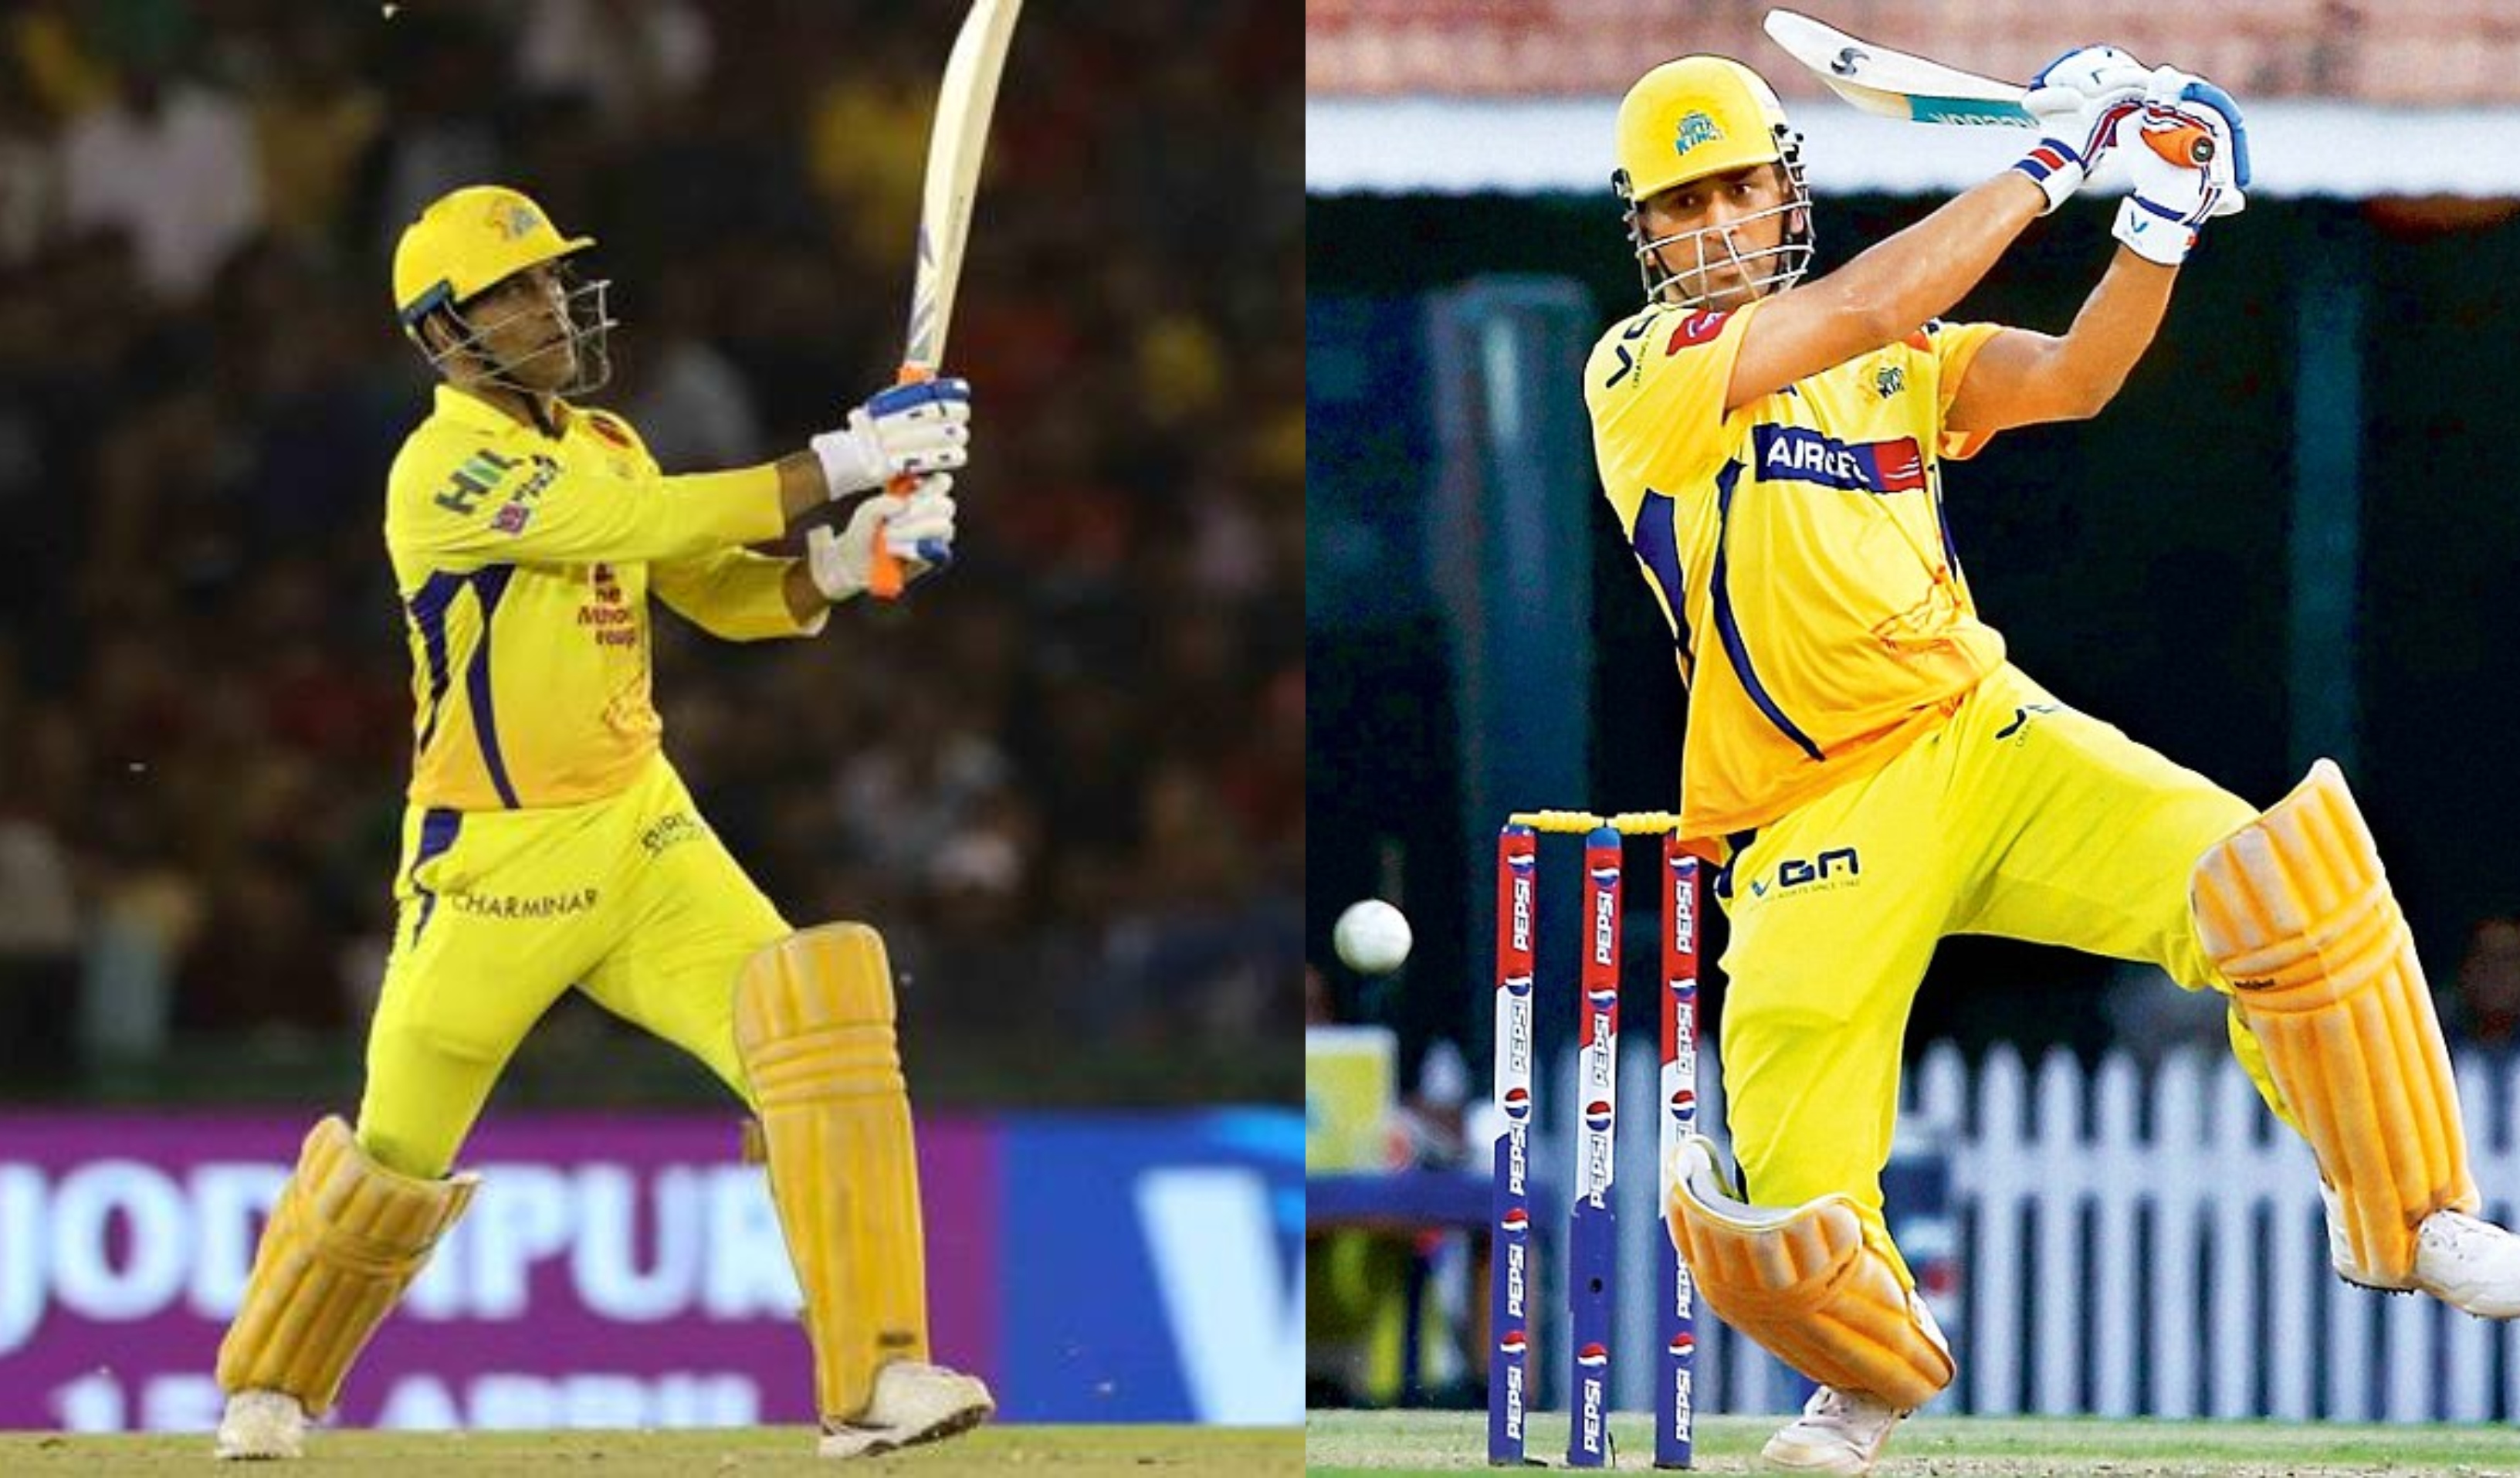 Dhoni playing his iconic shot for CSK | AFP